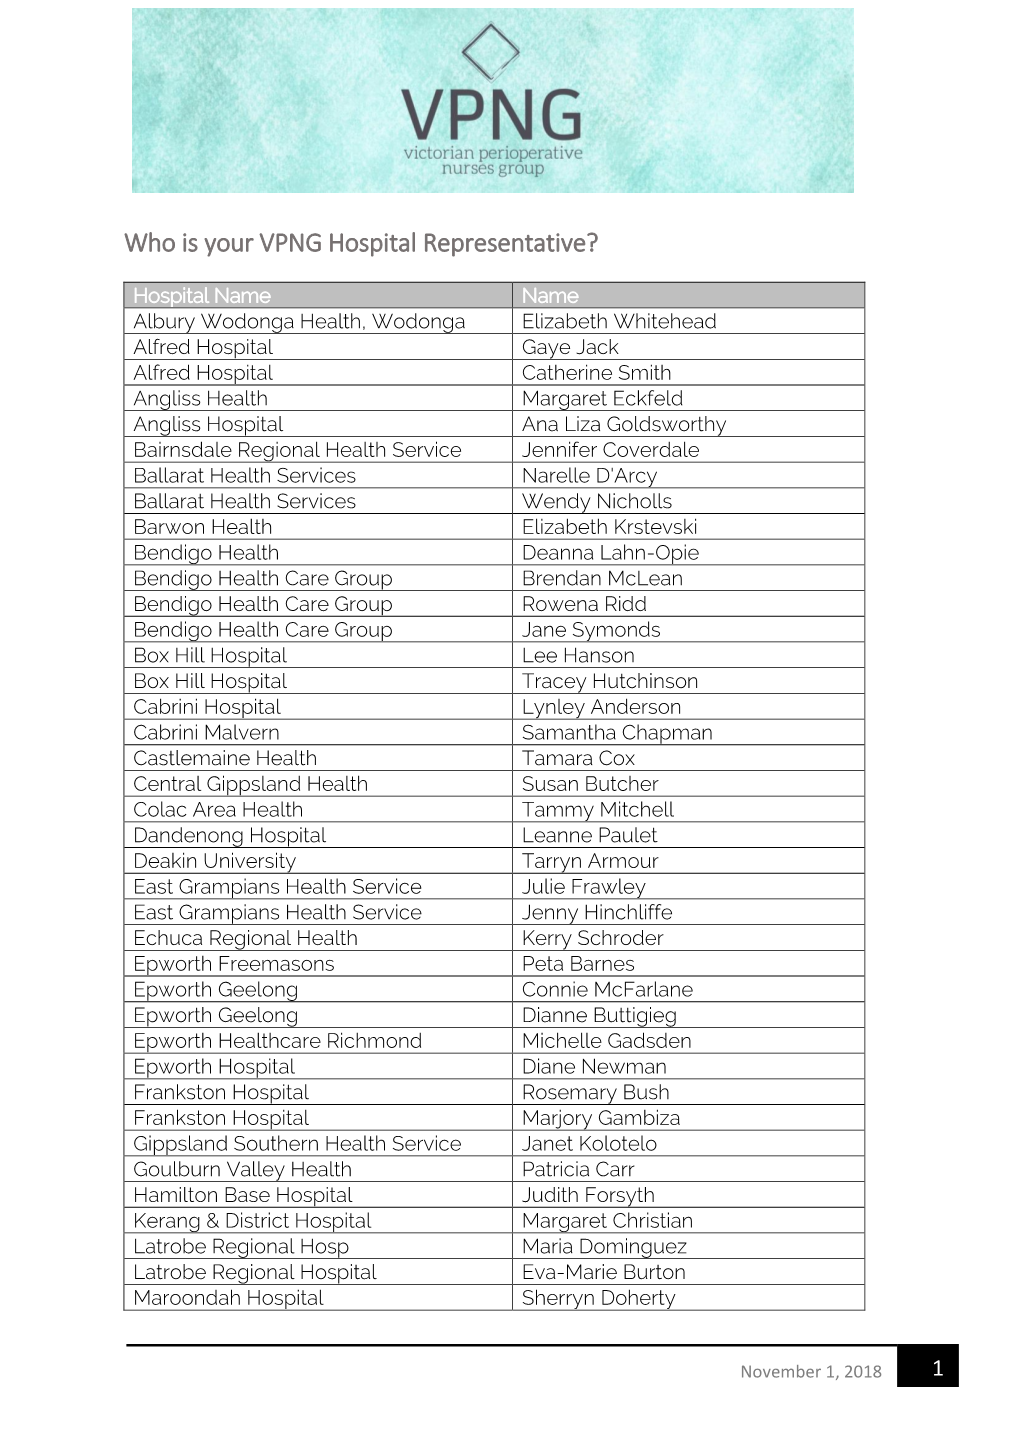 Who Is Your VPNG Hospital Representative?